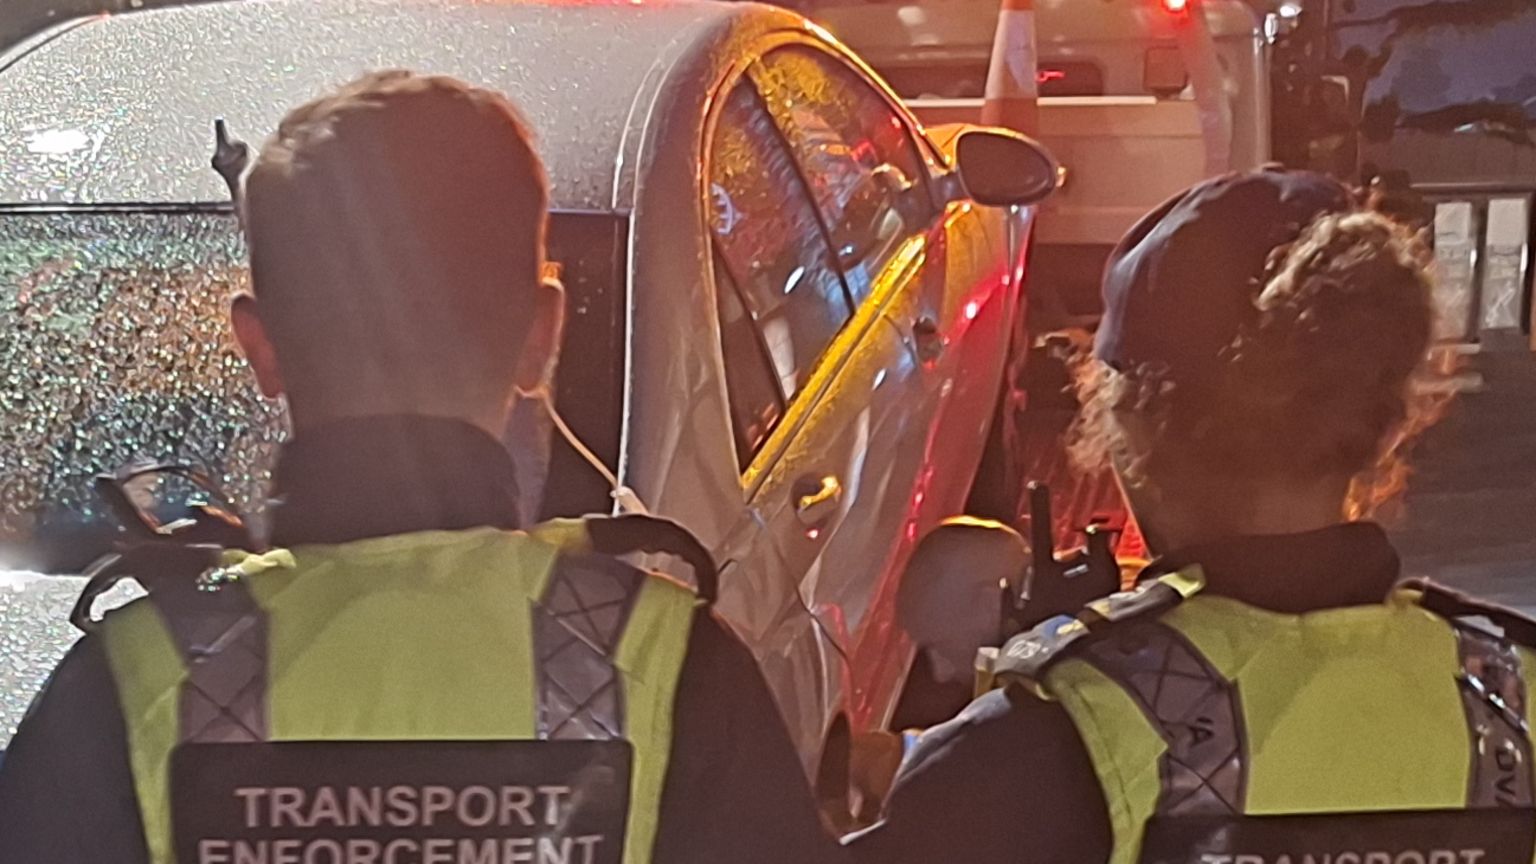 Two transport enforcement officers, one male and one female who is wearing a cap,  stand with their back to camera while looking at a sized grey car being towed away. They are wearing high viz jackets and it is dark